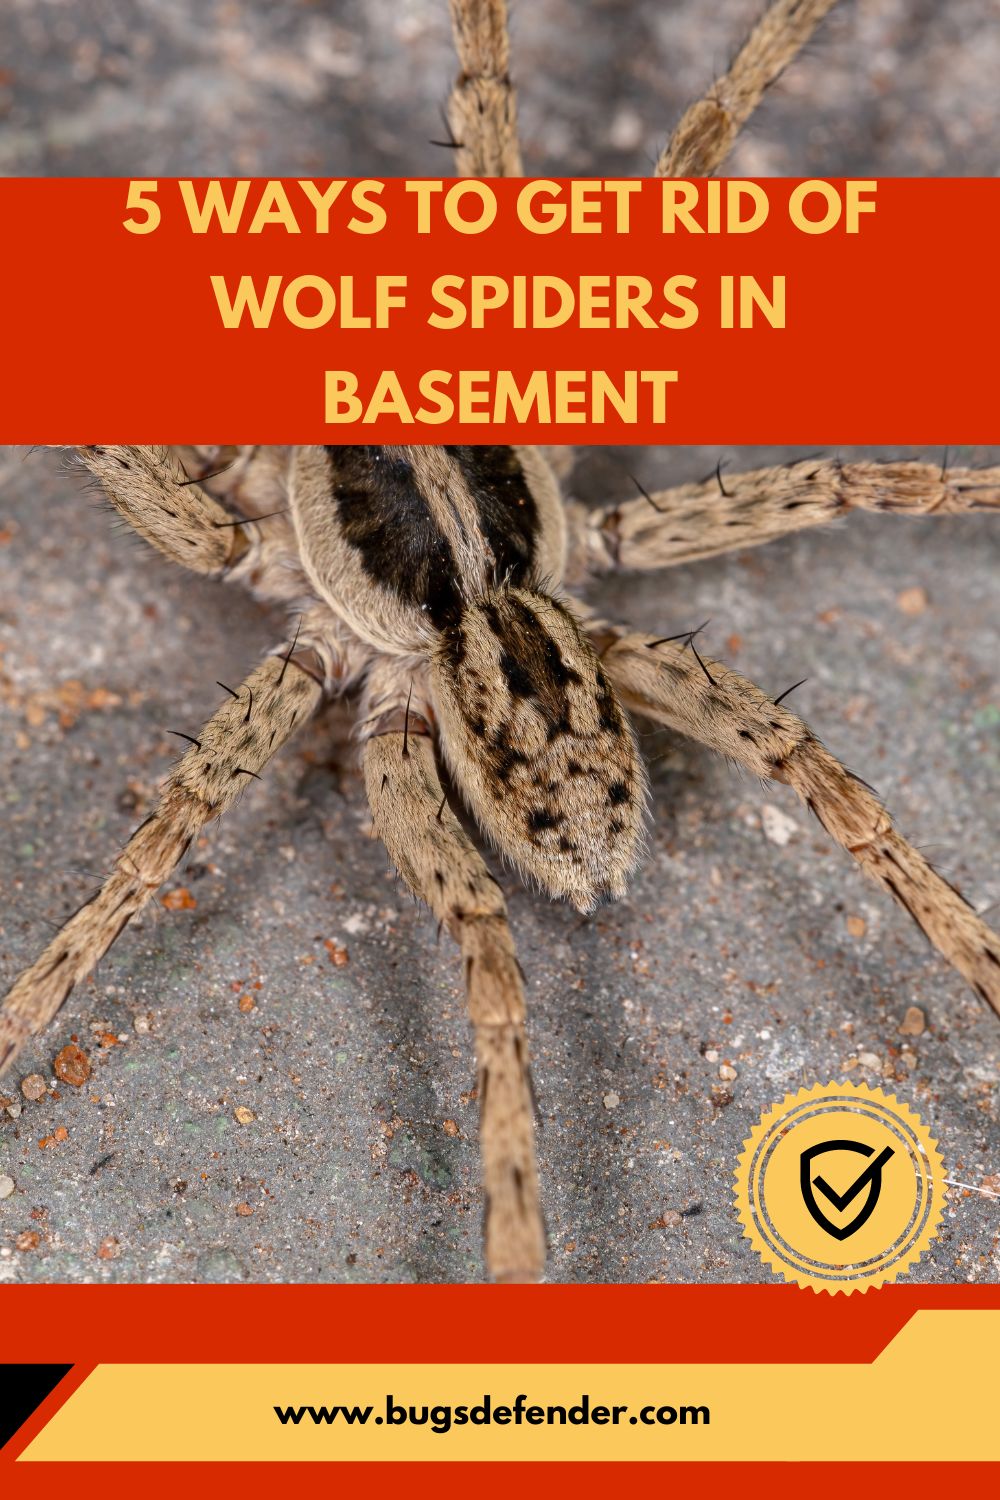 5 Ways to Get Rid of Wolf Spiders in Basement pin 1